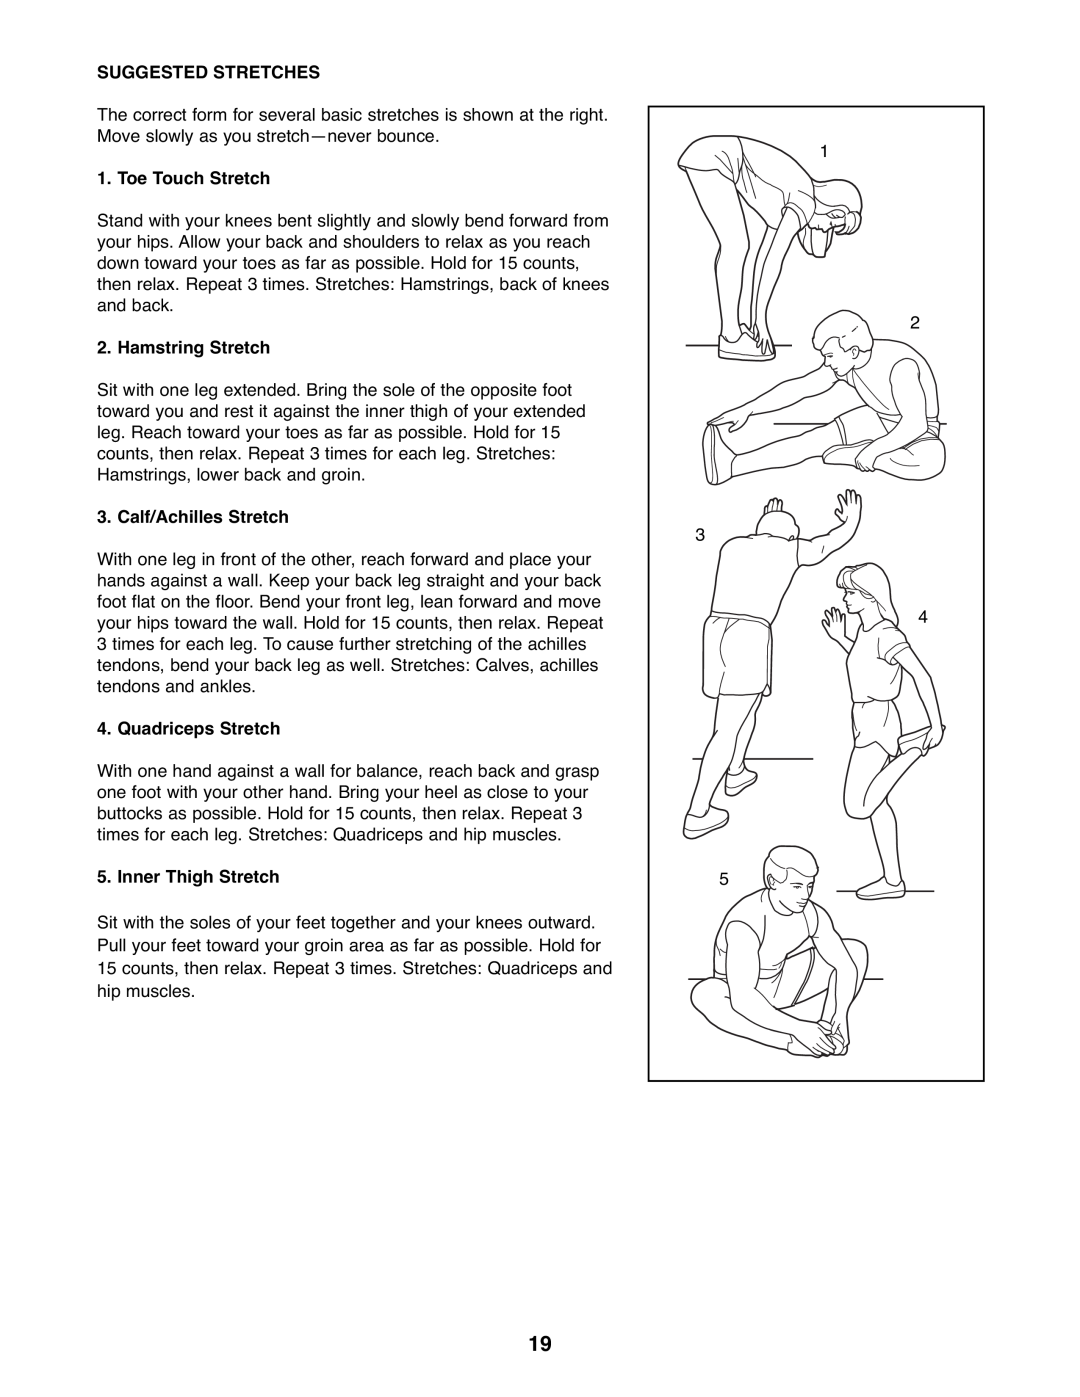 NordicTrack NTEX3196.0 user manual Suggested Stretches, Toe Touch Stretch, Hamstring Stretch, Calf/Achilles Stretch 